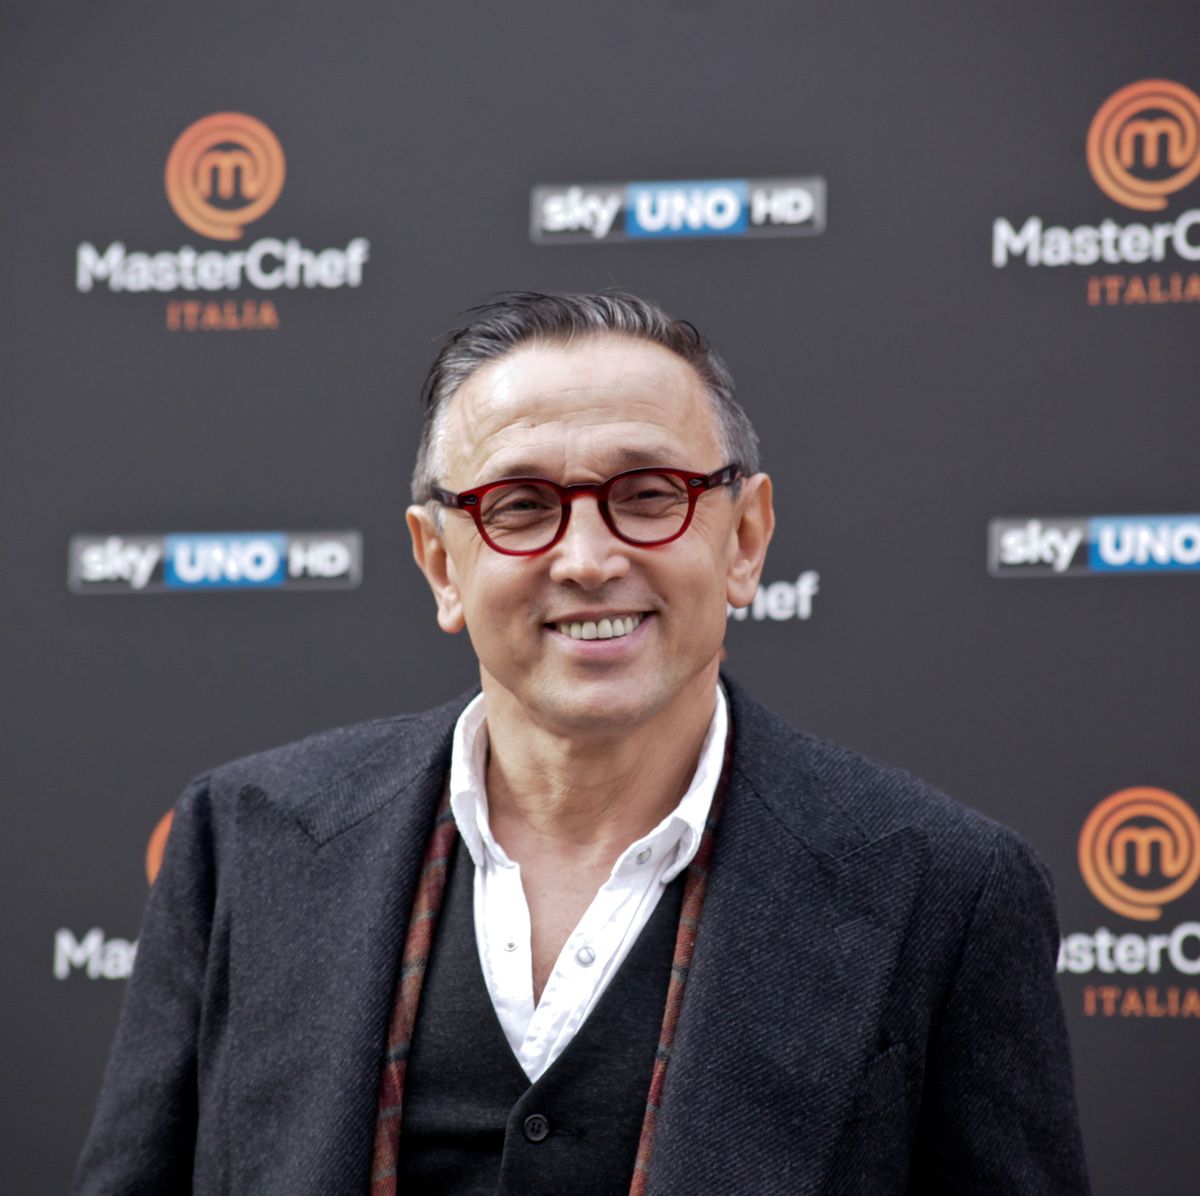 https://hips.hearstapps.com/hmg-prod/images/bruno-barbieri-during-the-press-conference-of-masterchef-news-photo-1651243739.jpg?crop=0.669xw:1.00xh;0.166xw,0&resize=1200:*